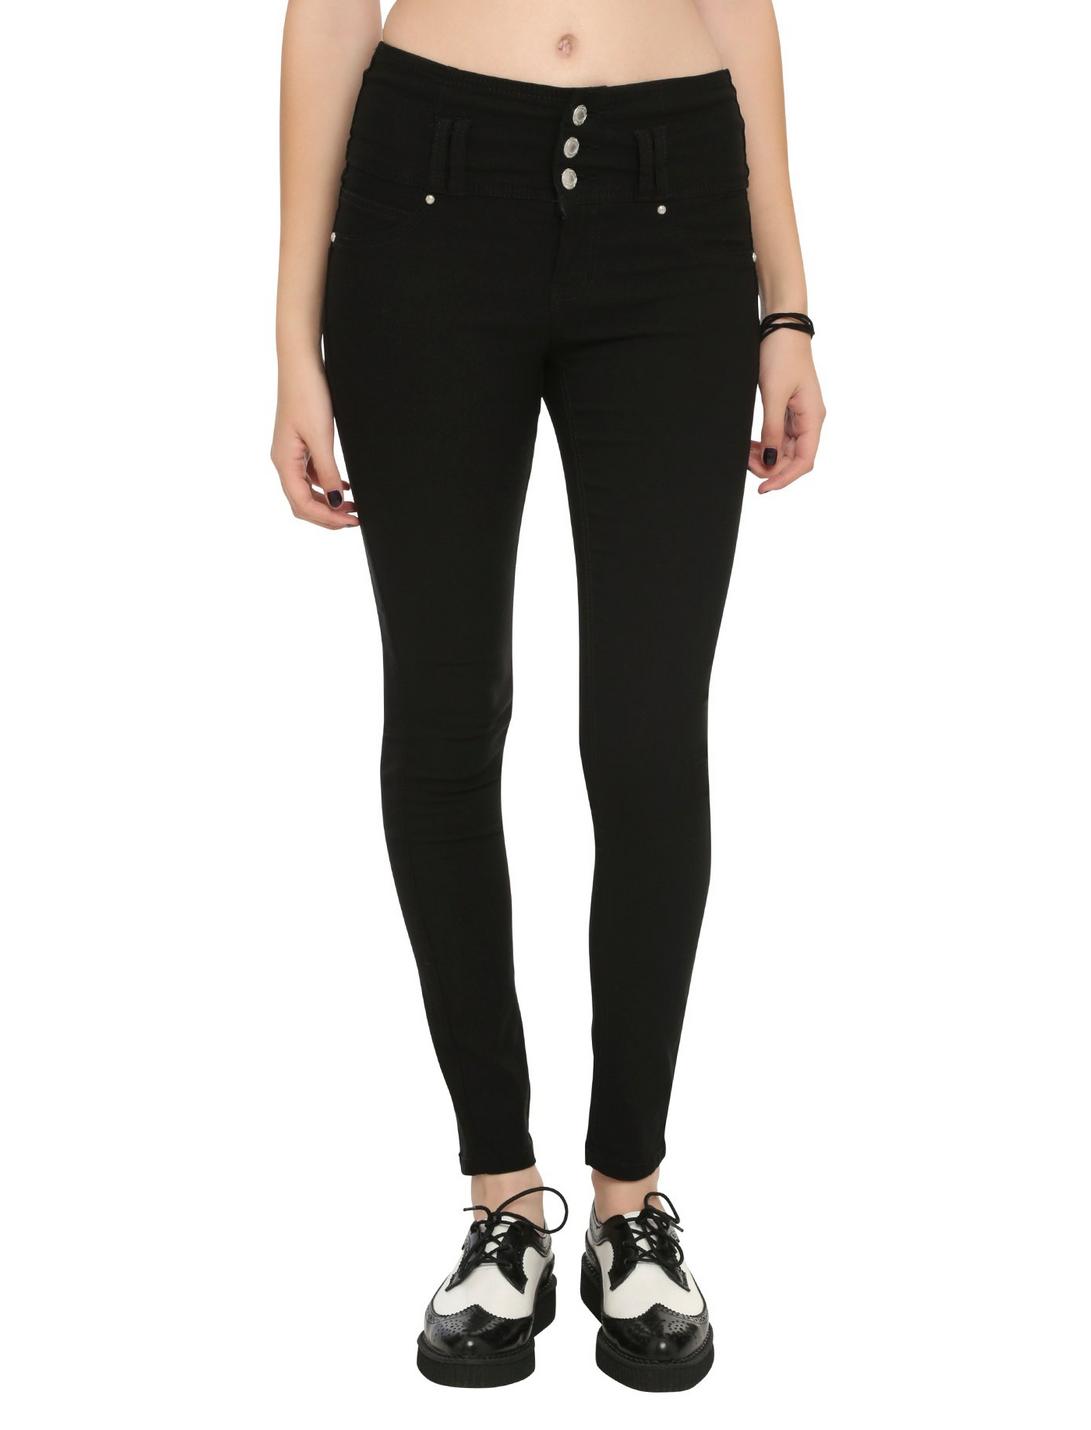 Almost Famous Black High-Waisted Skinny Jeans, BLACK, hi-res